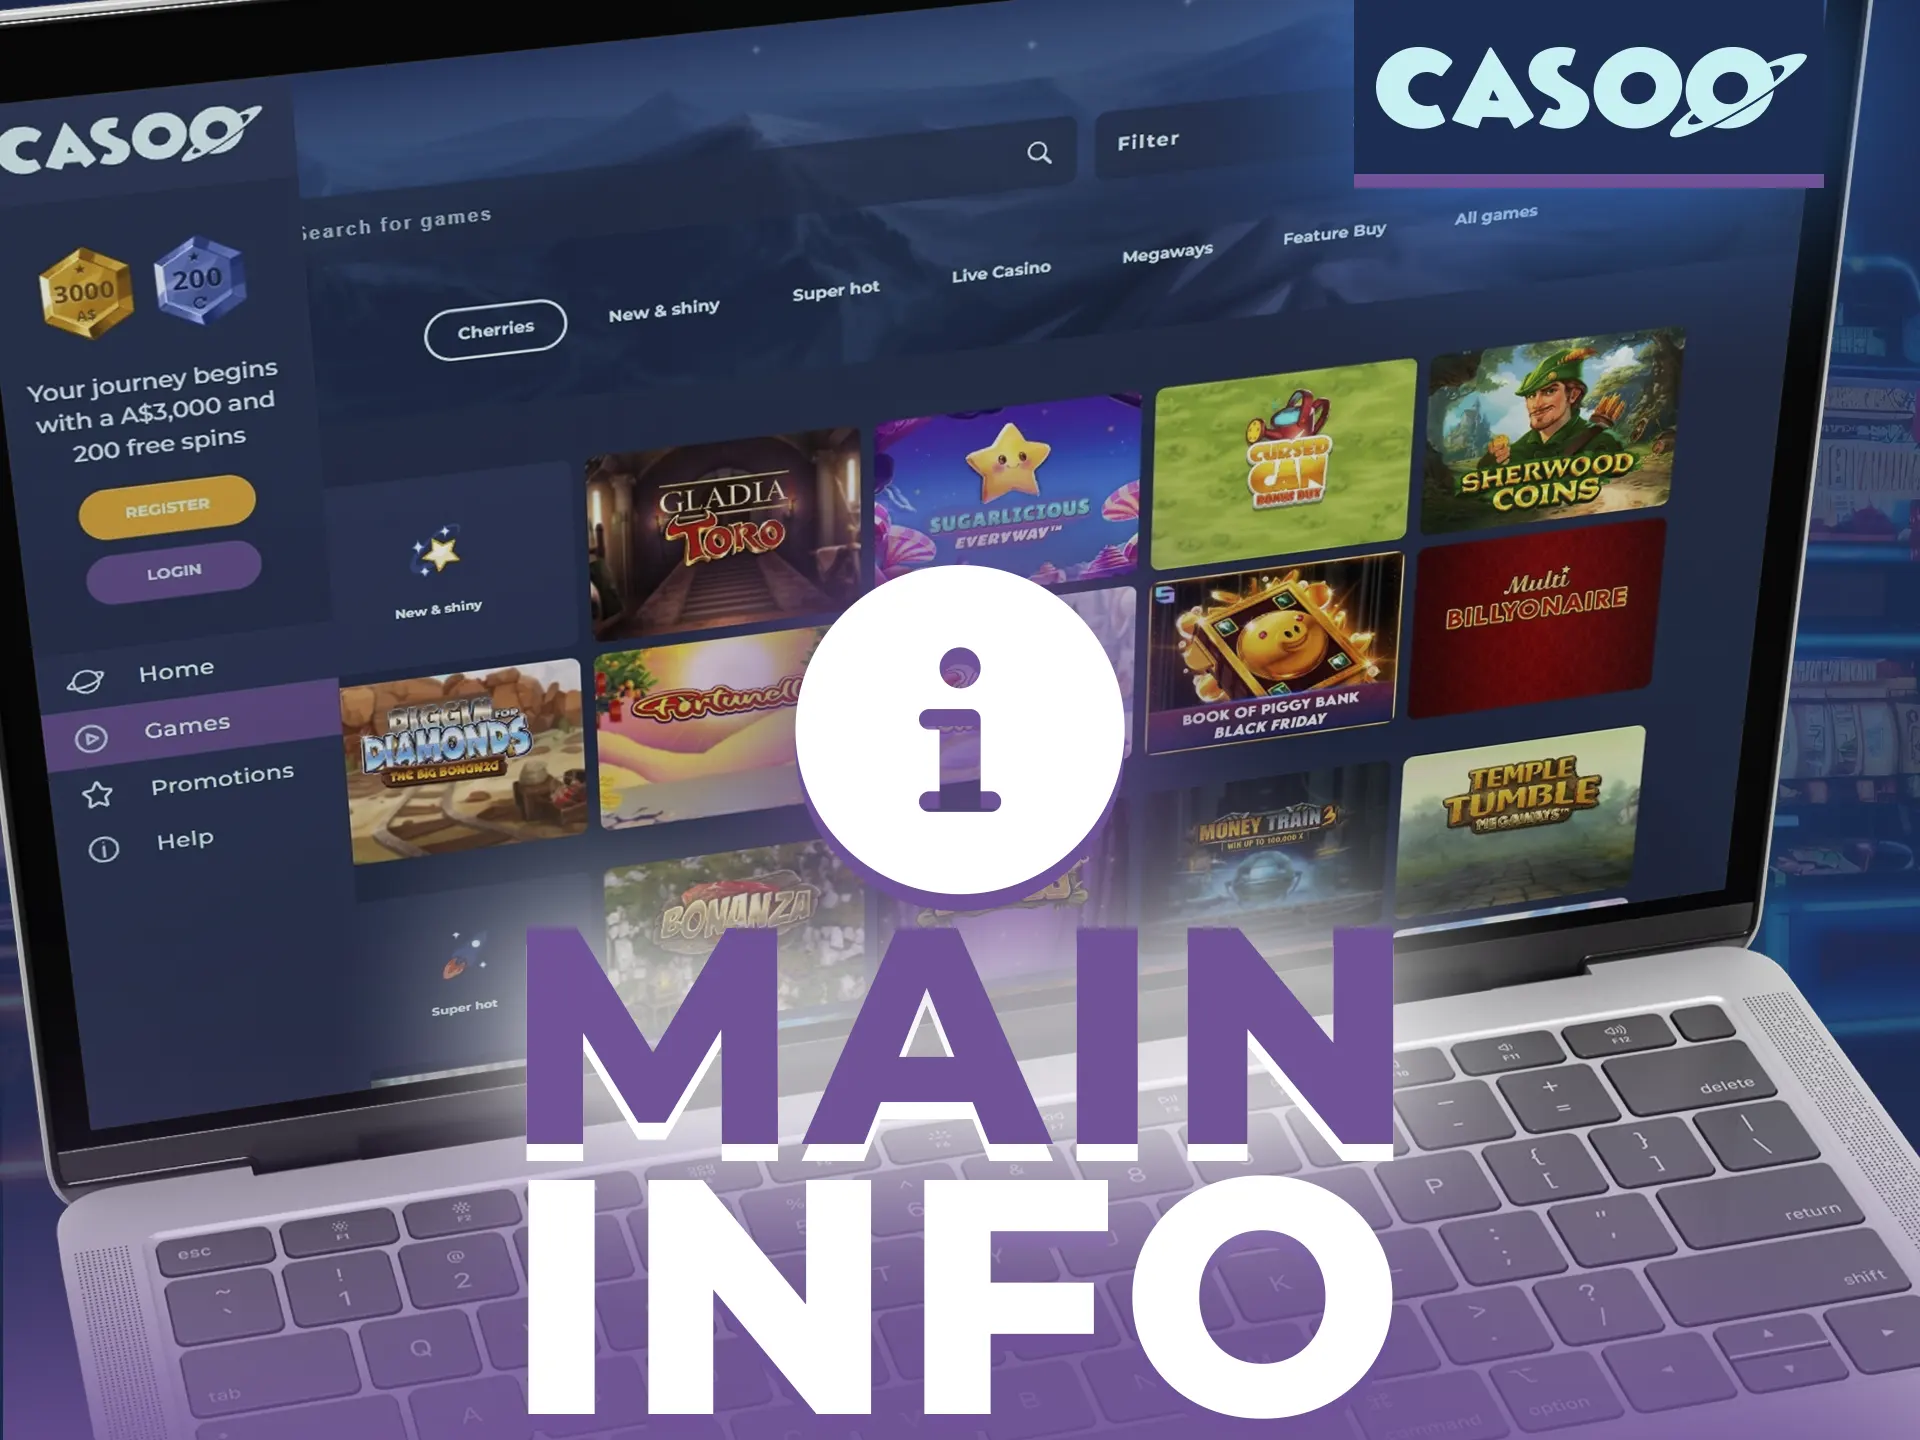 Learn more information about Casoo online casino.